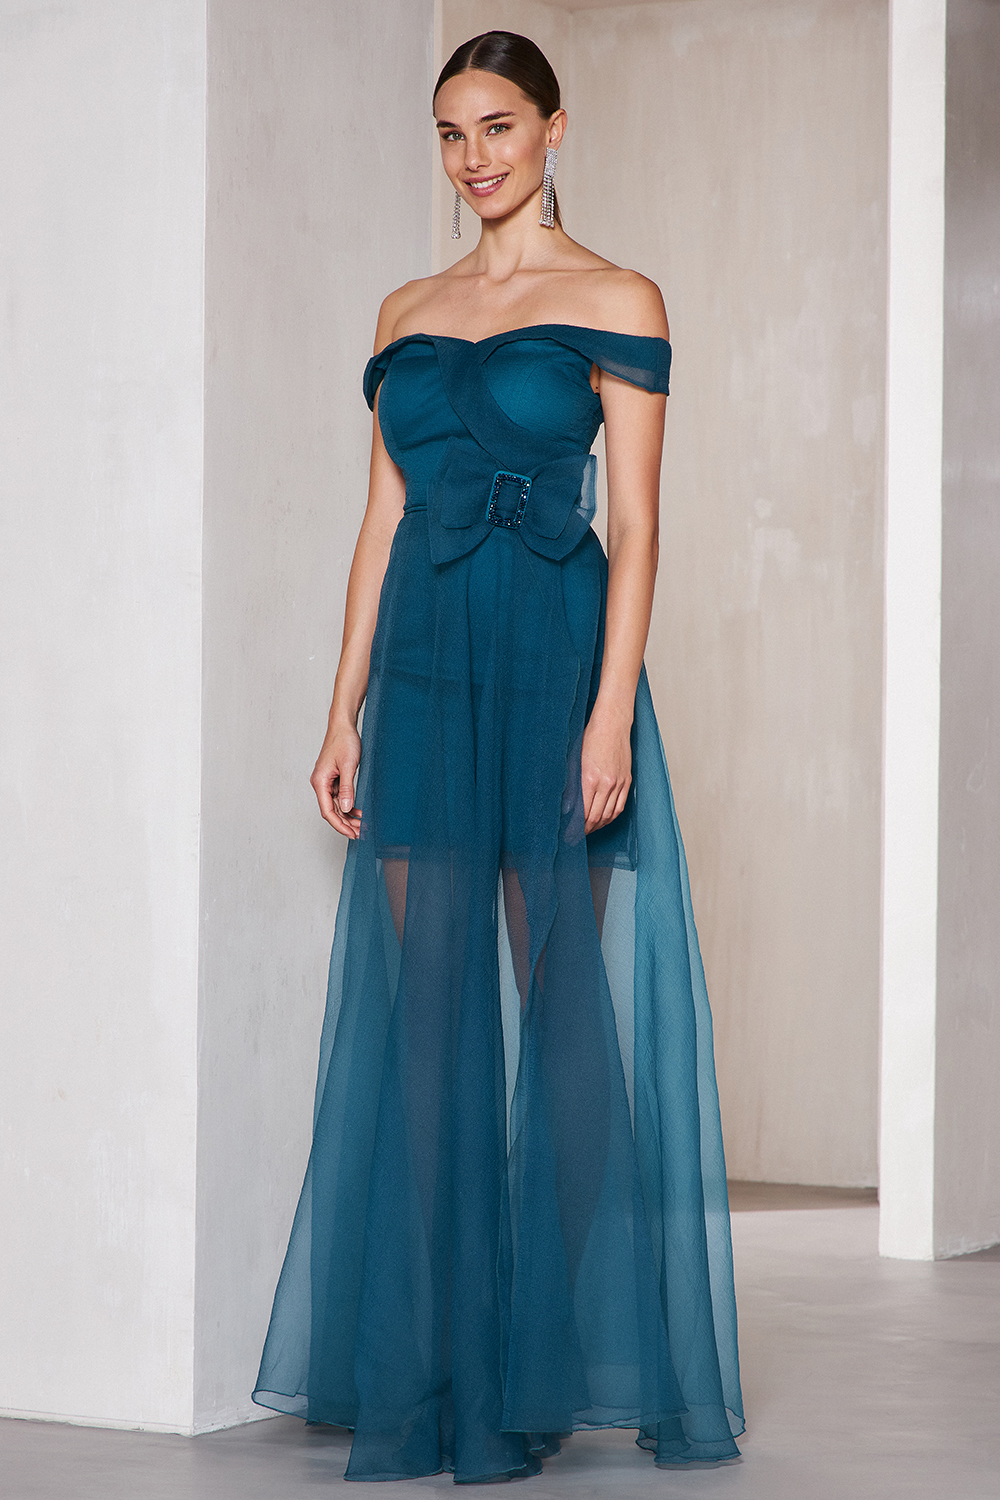 Long evening dress with orgzanza fabric and bow at the waist